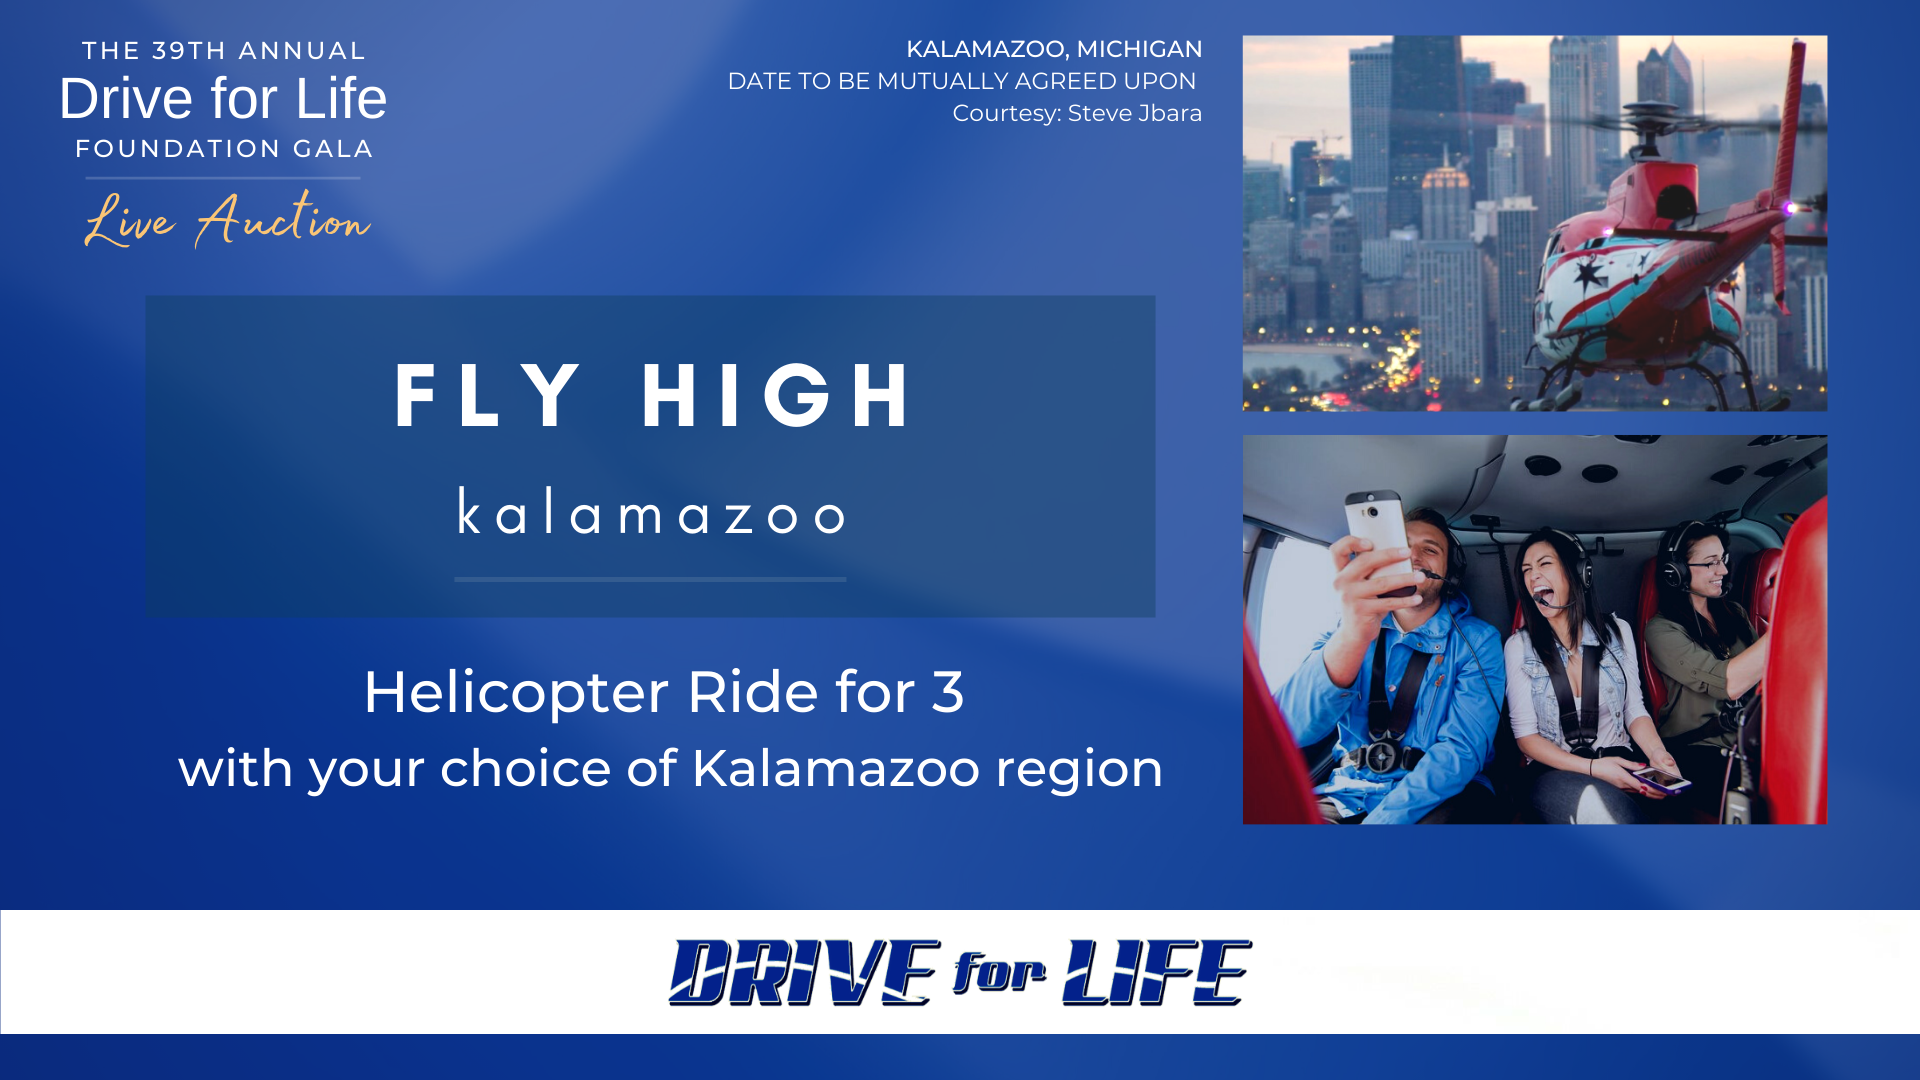 LIVE AUCTION EXPERIENCE: Fly High Kalamazoo - Available at the 39th Annual Drive for Life Foundation Monday, September 13, 2021 at 6:30 p.m. at the Radisson Plaza Hotel in Kalamazoo, Mich.